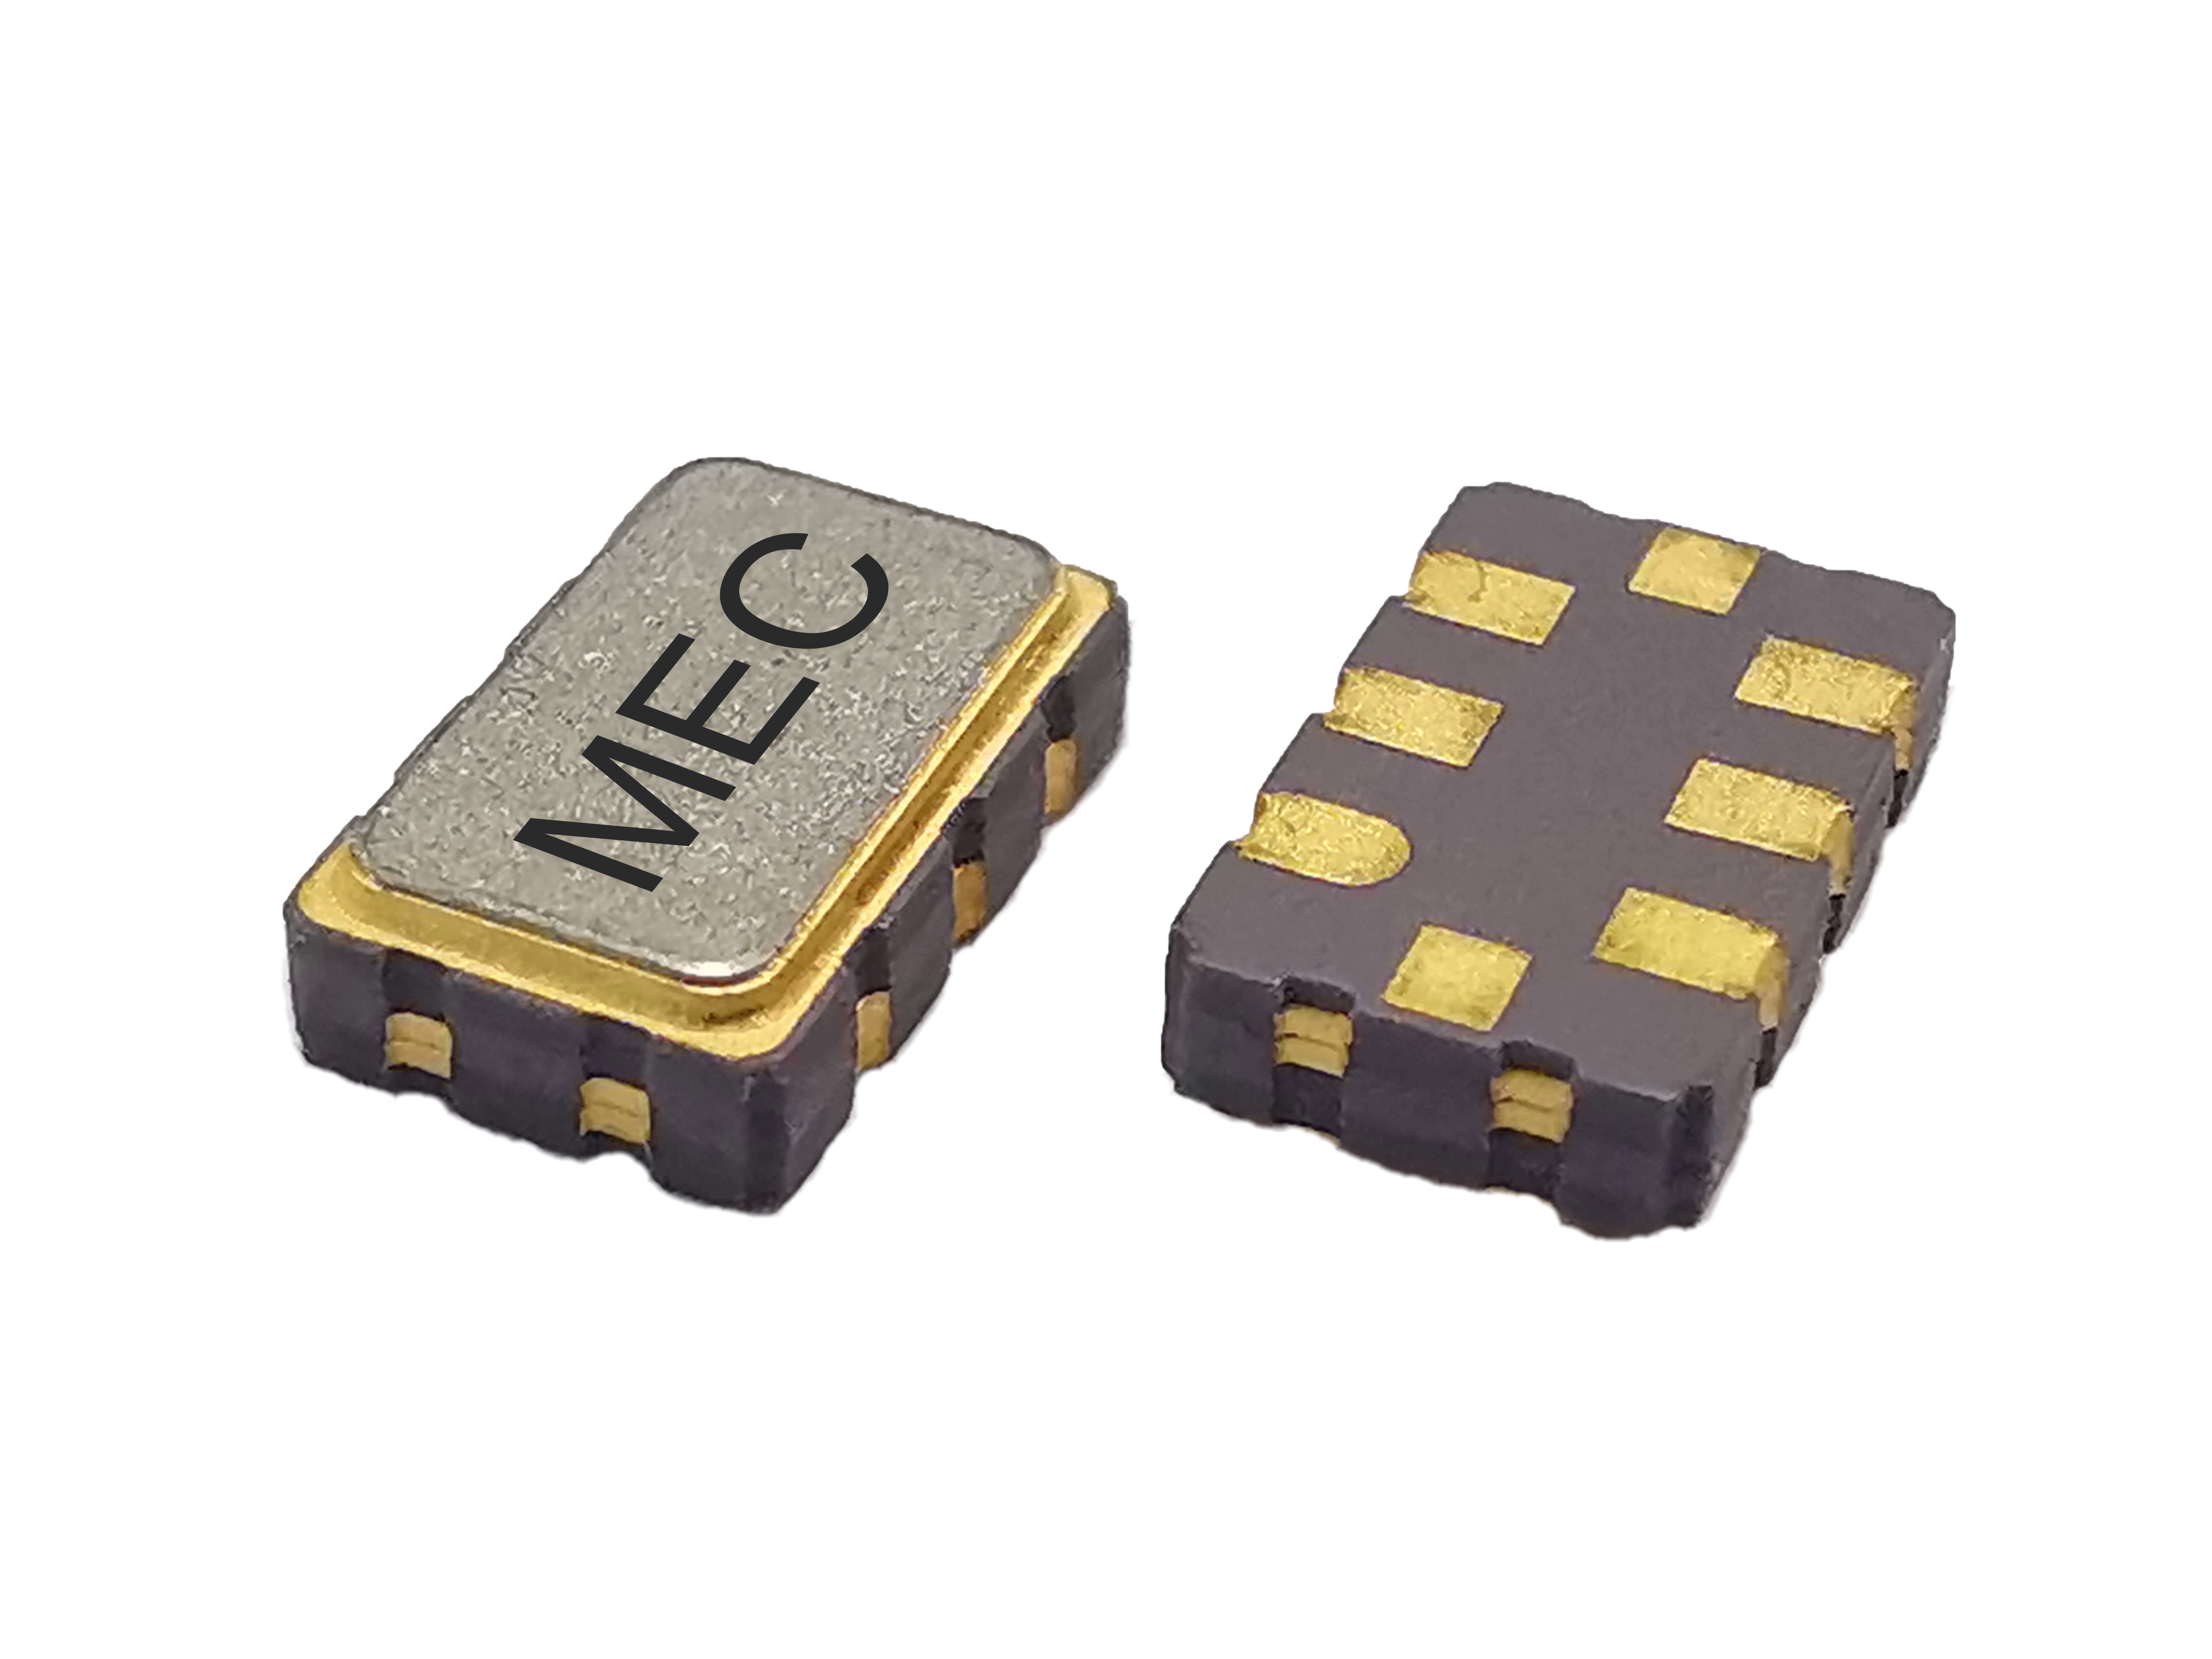 HQJF538 5032 1.8V Ultra Low Jitter Quick-turn Programmable Differential CML SMD Crystal Oscillator